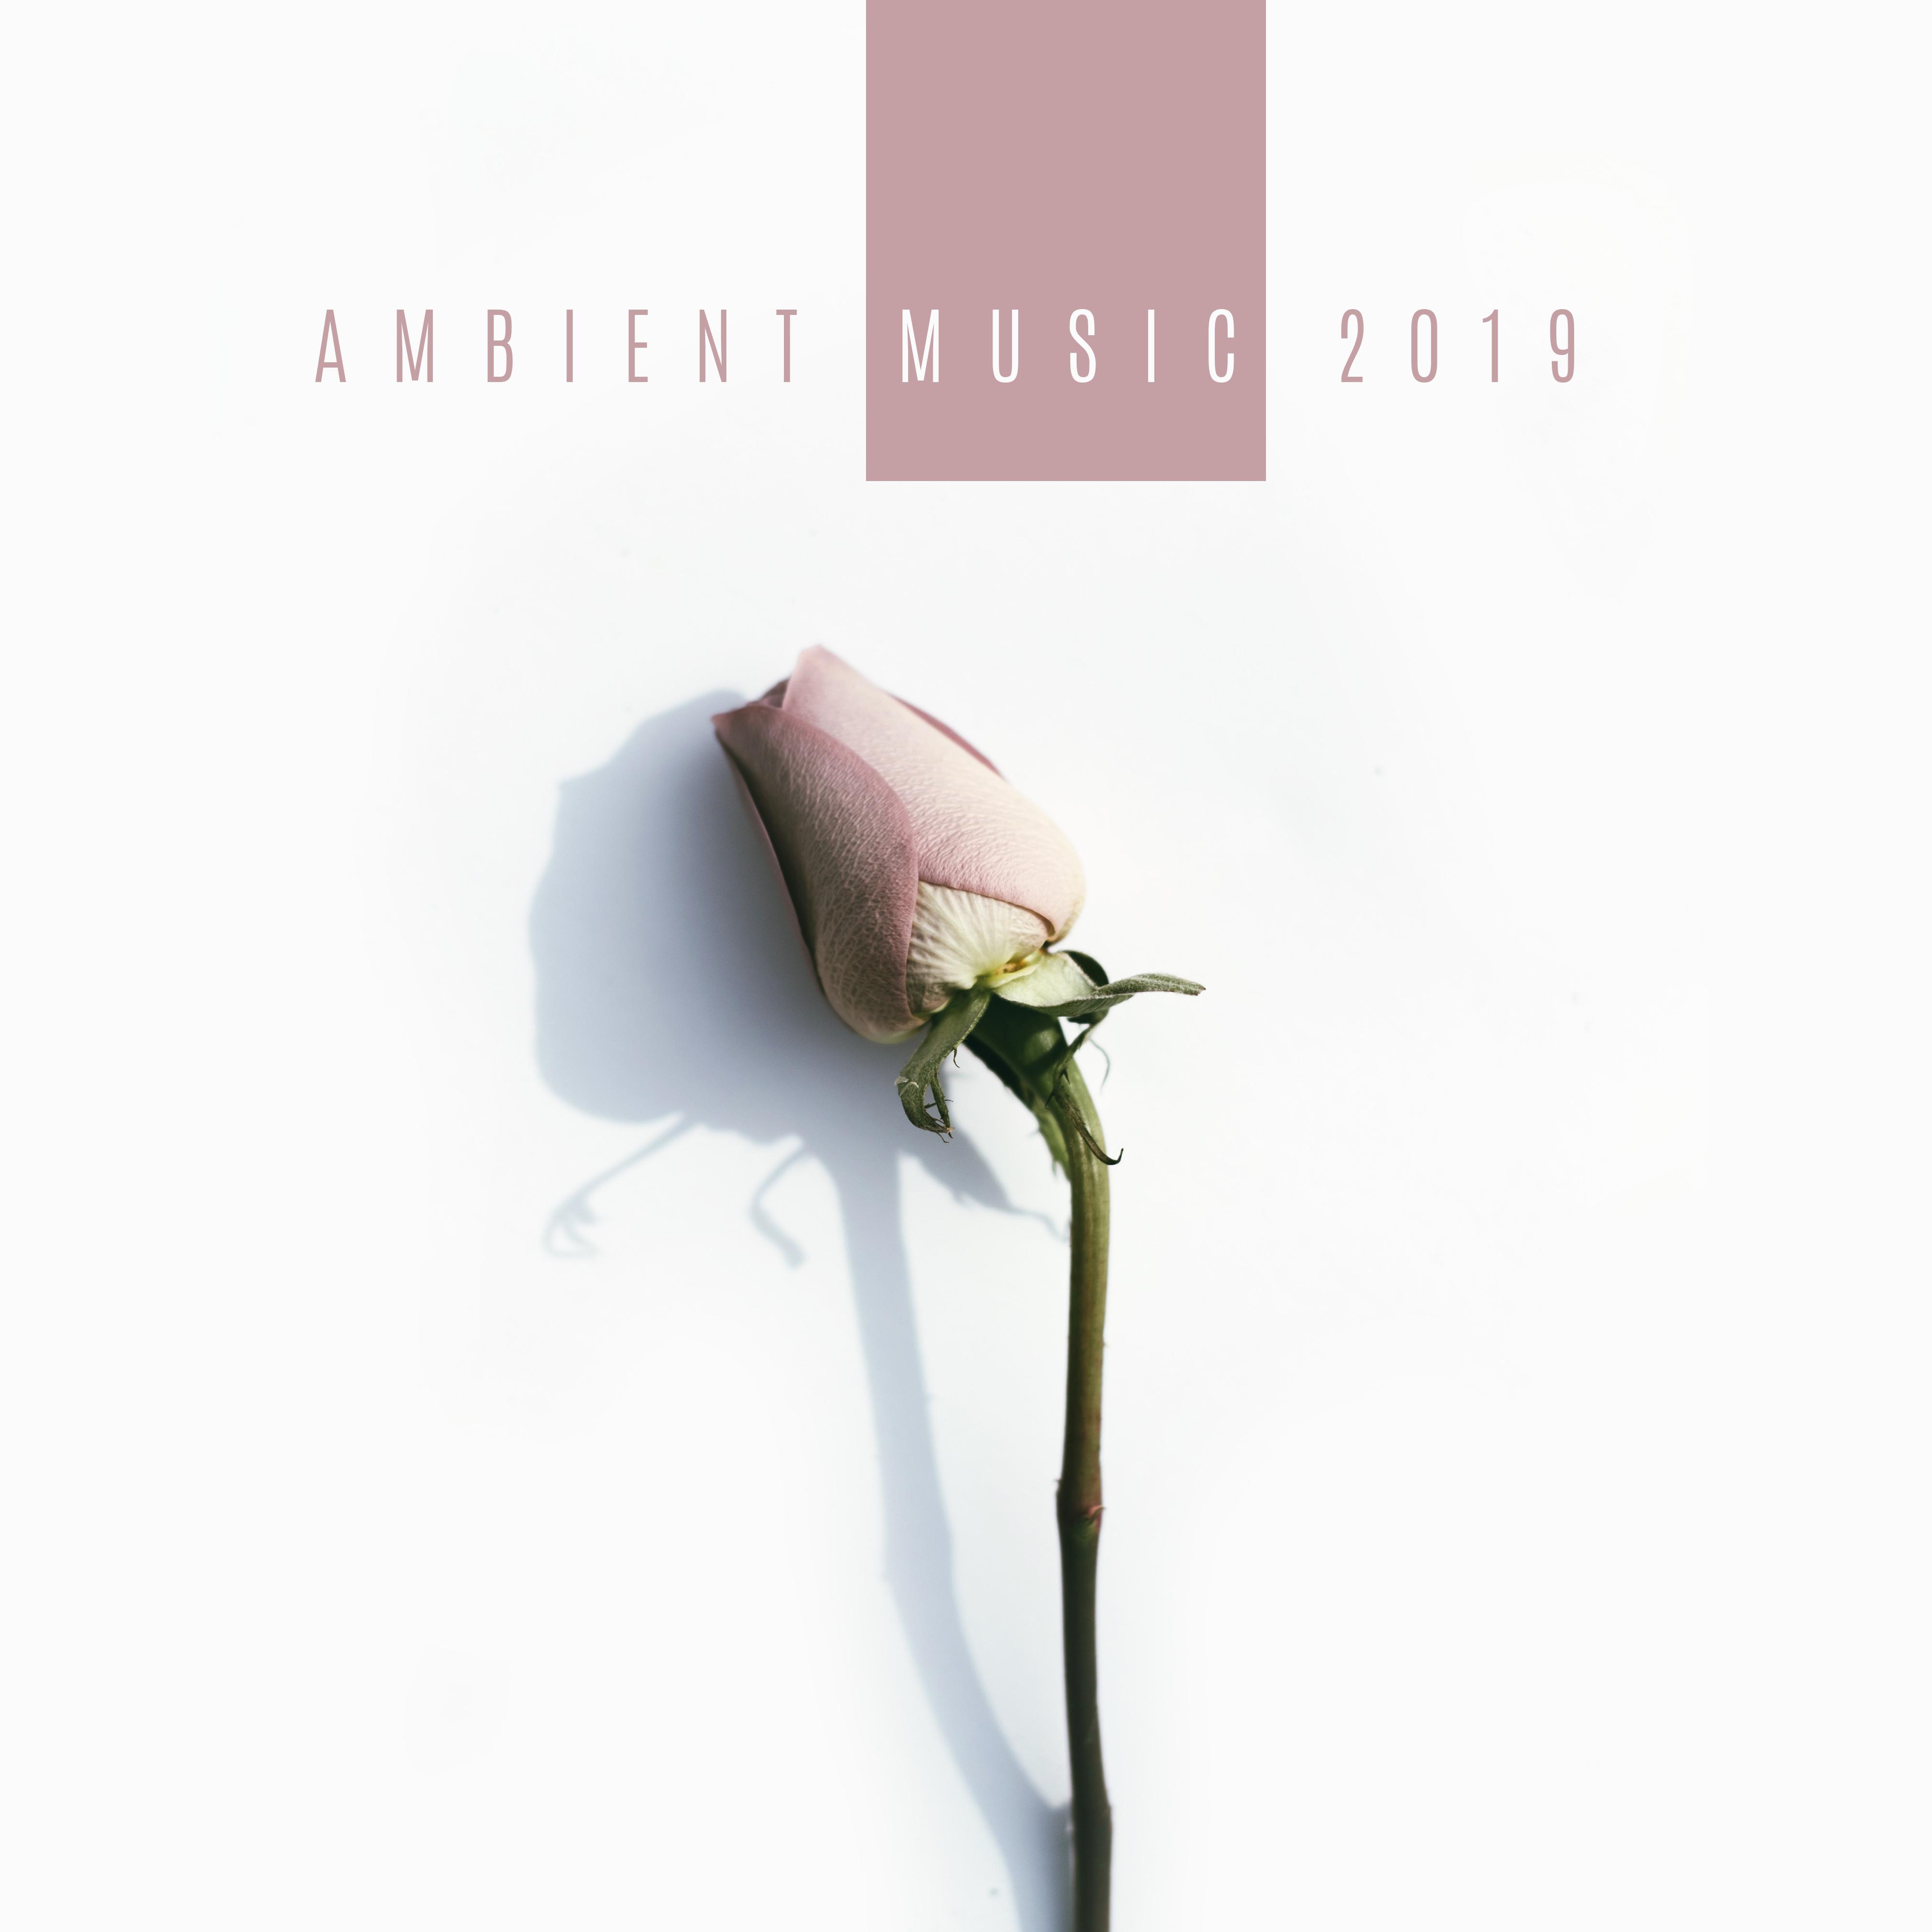 Ambient Music 2019 – Calming Sounds for Yoga, Meditation, Relaxation, Sleep, Massage, Zen, Lounge Music, Relaxing Music Therapy, Music Zone, Nature Sounds